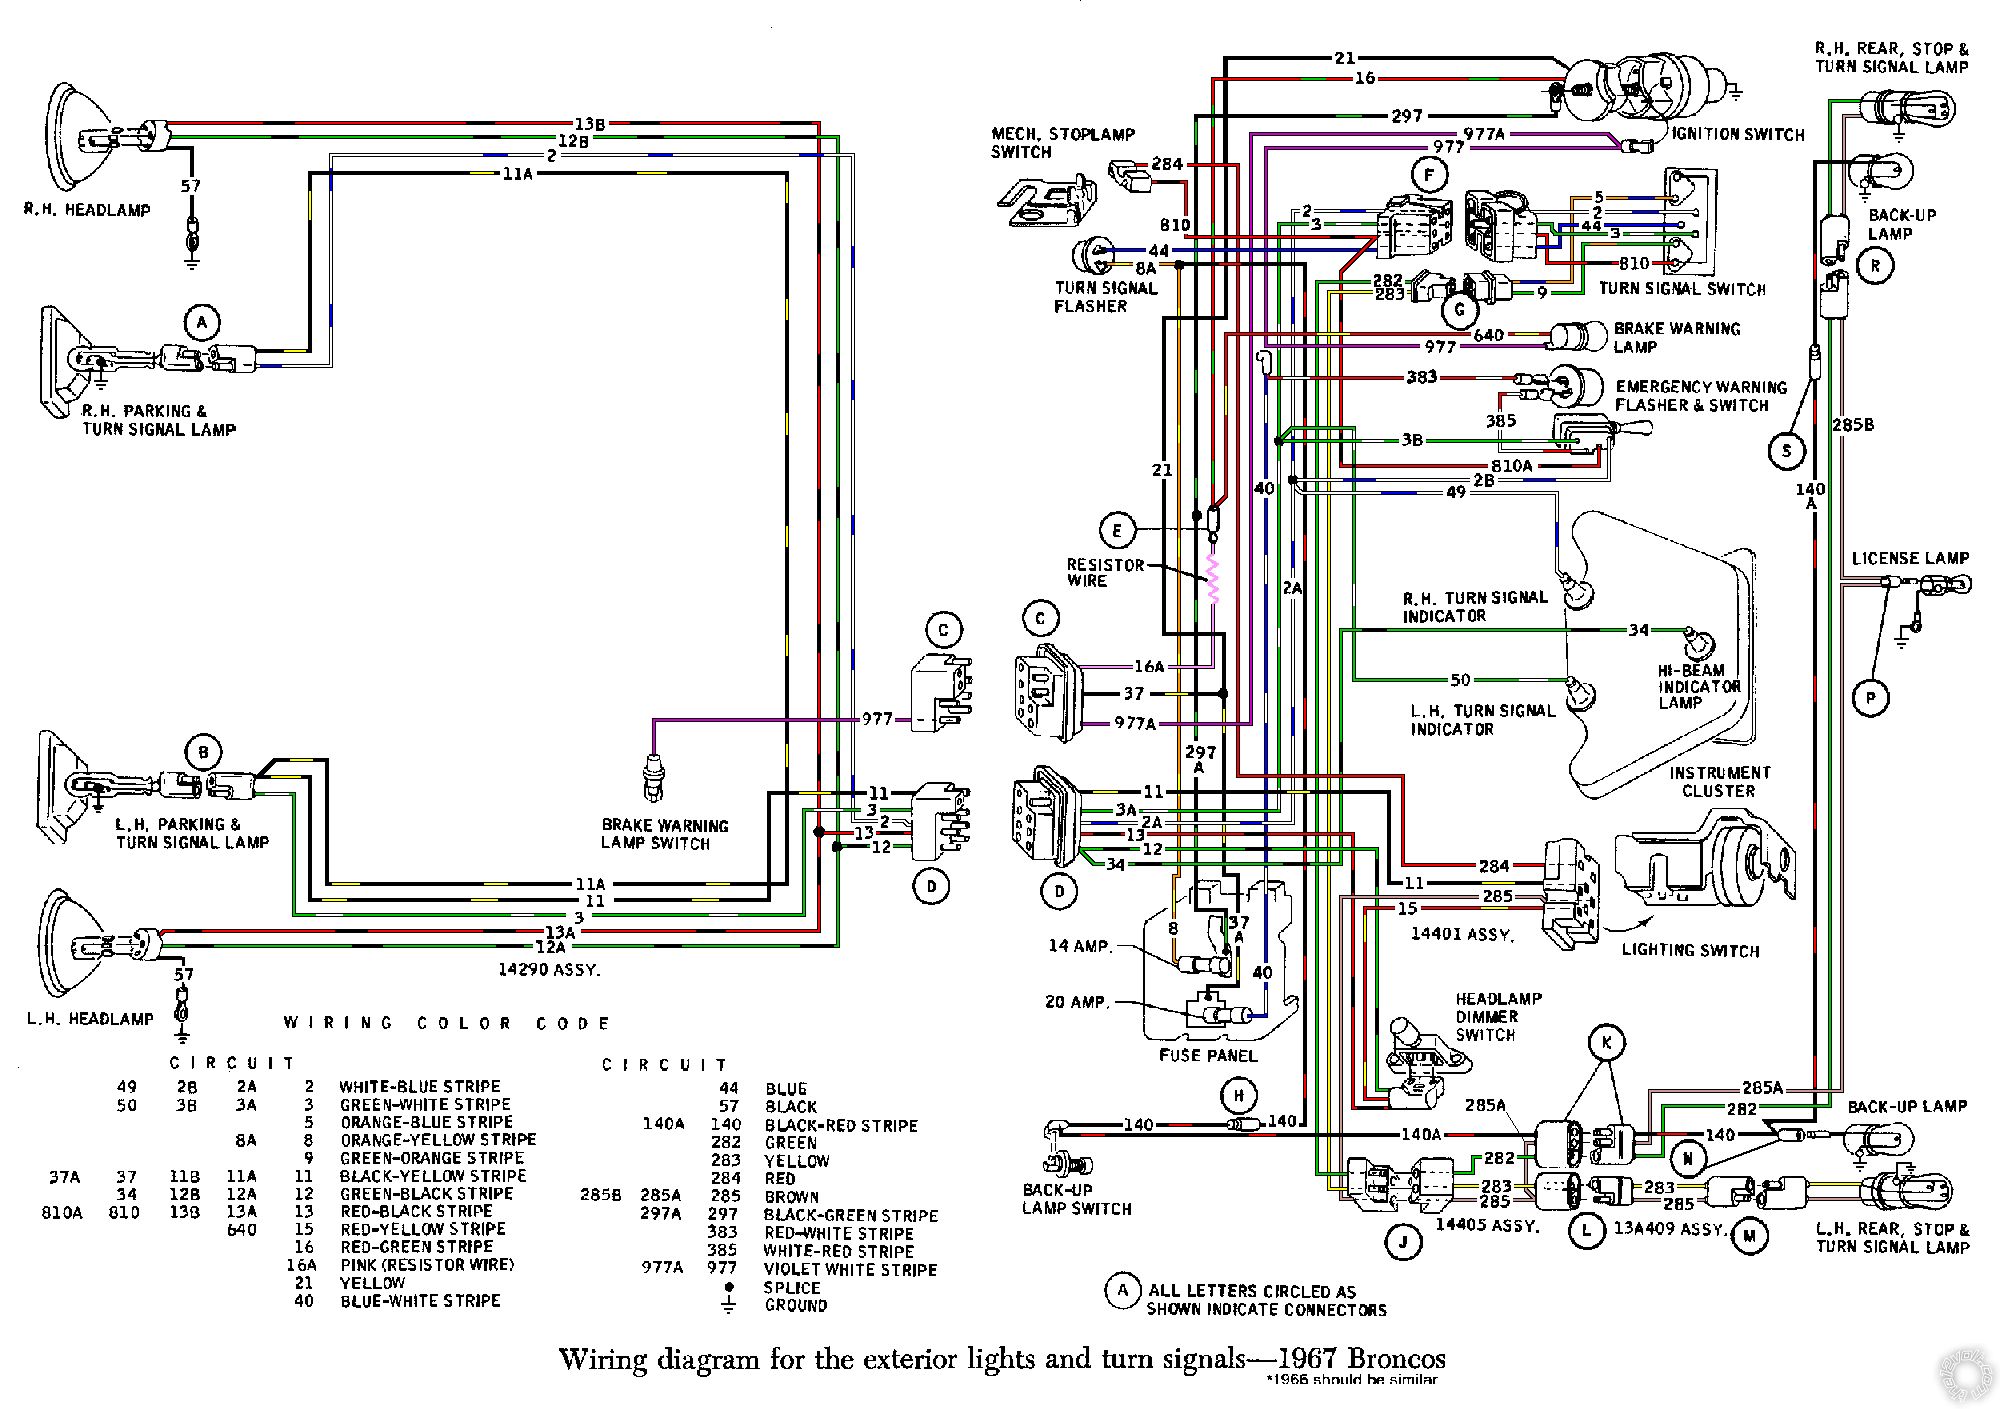 Ford 3400 Tractor Starter Solenoid Wiring Diagram from www.the12volt.com